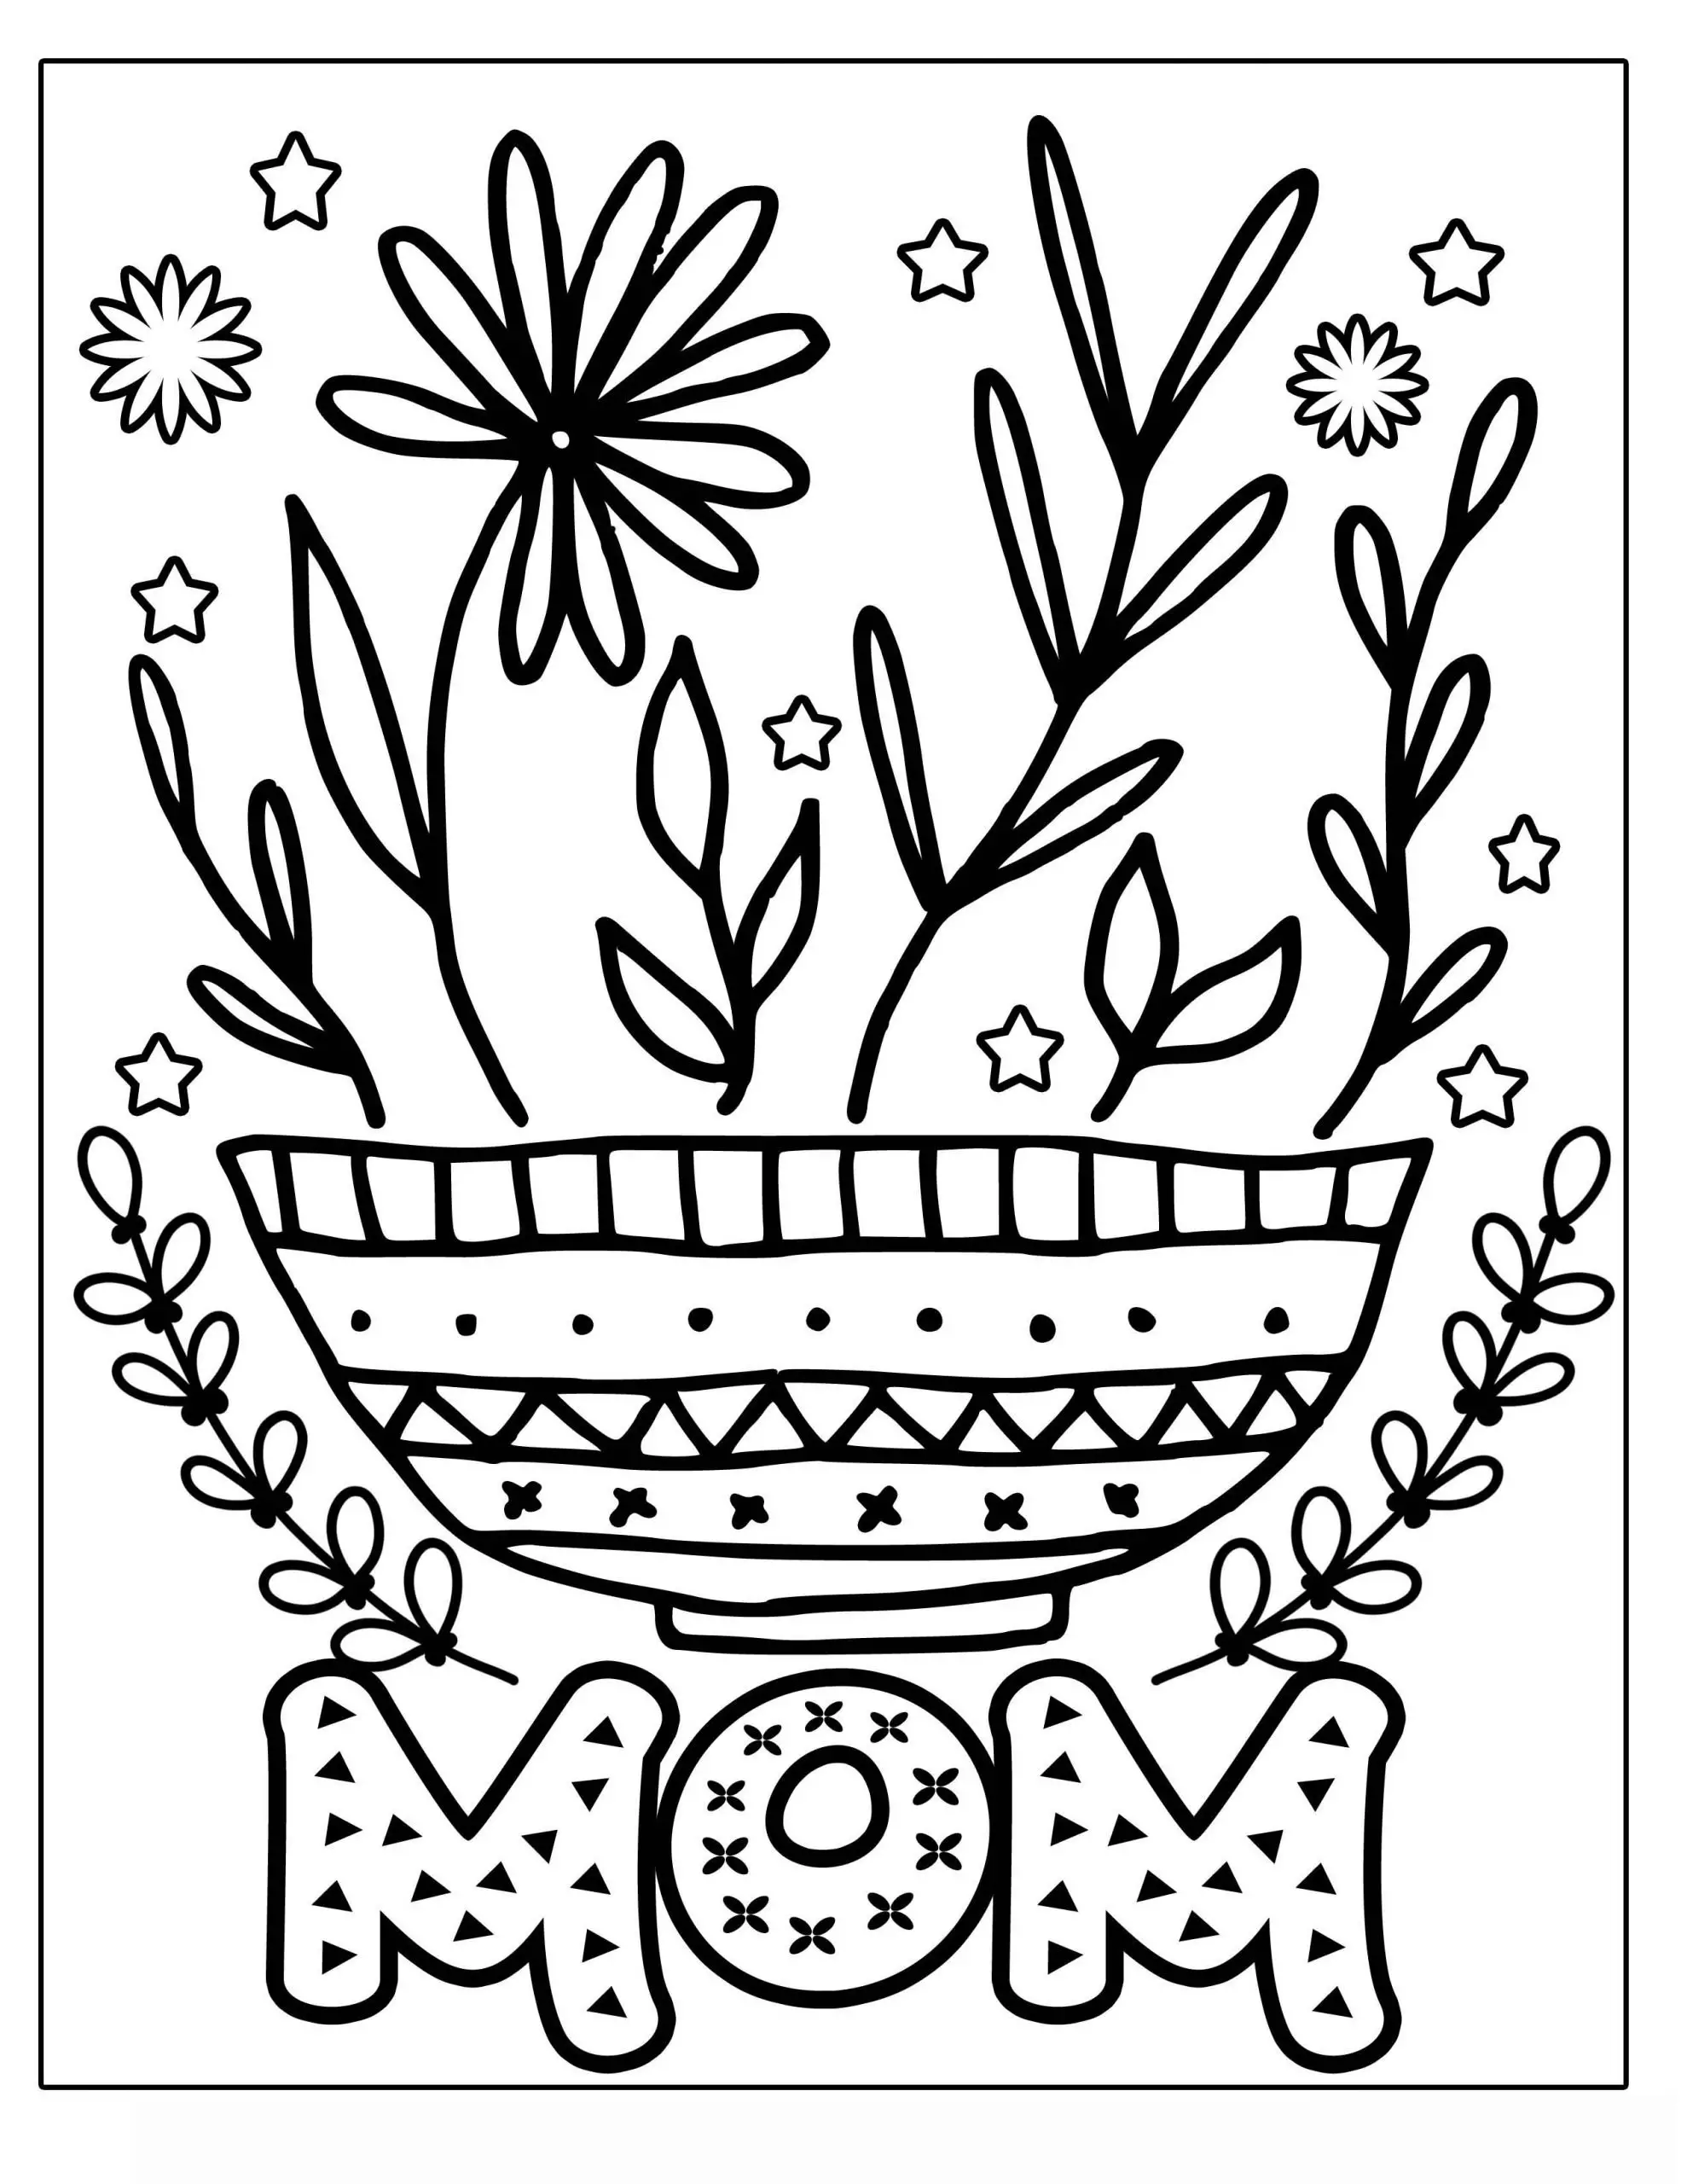 MOTHER'S DAY flower with vines and frills Clipart Coloring Pages for Kids Adults Art Activities Line Art